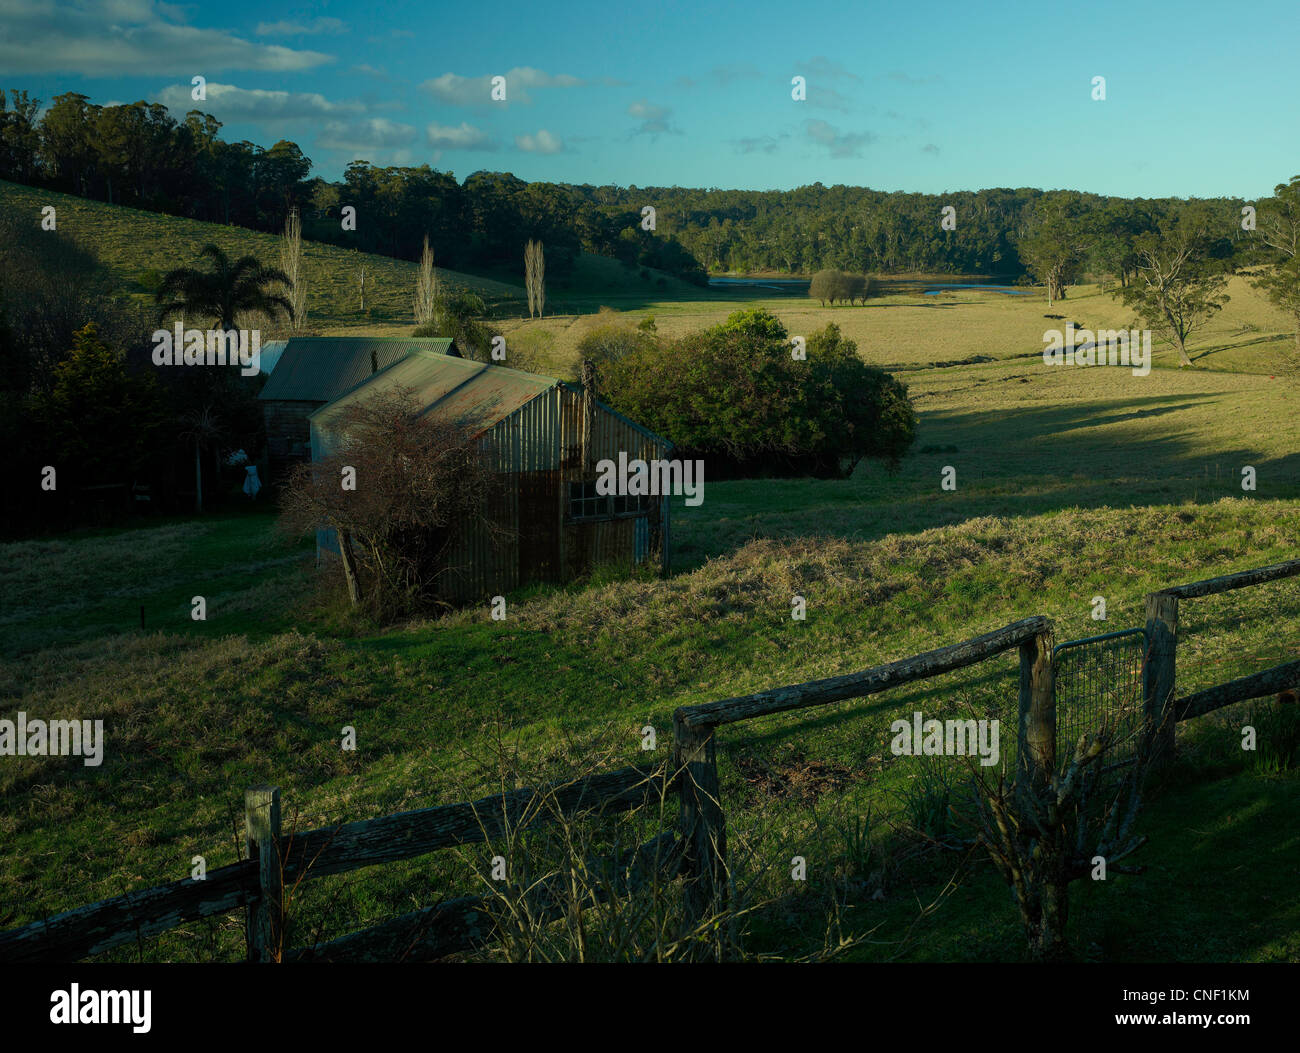 Late afternoon view over farm near Tilba Stock Photo